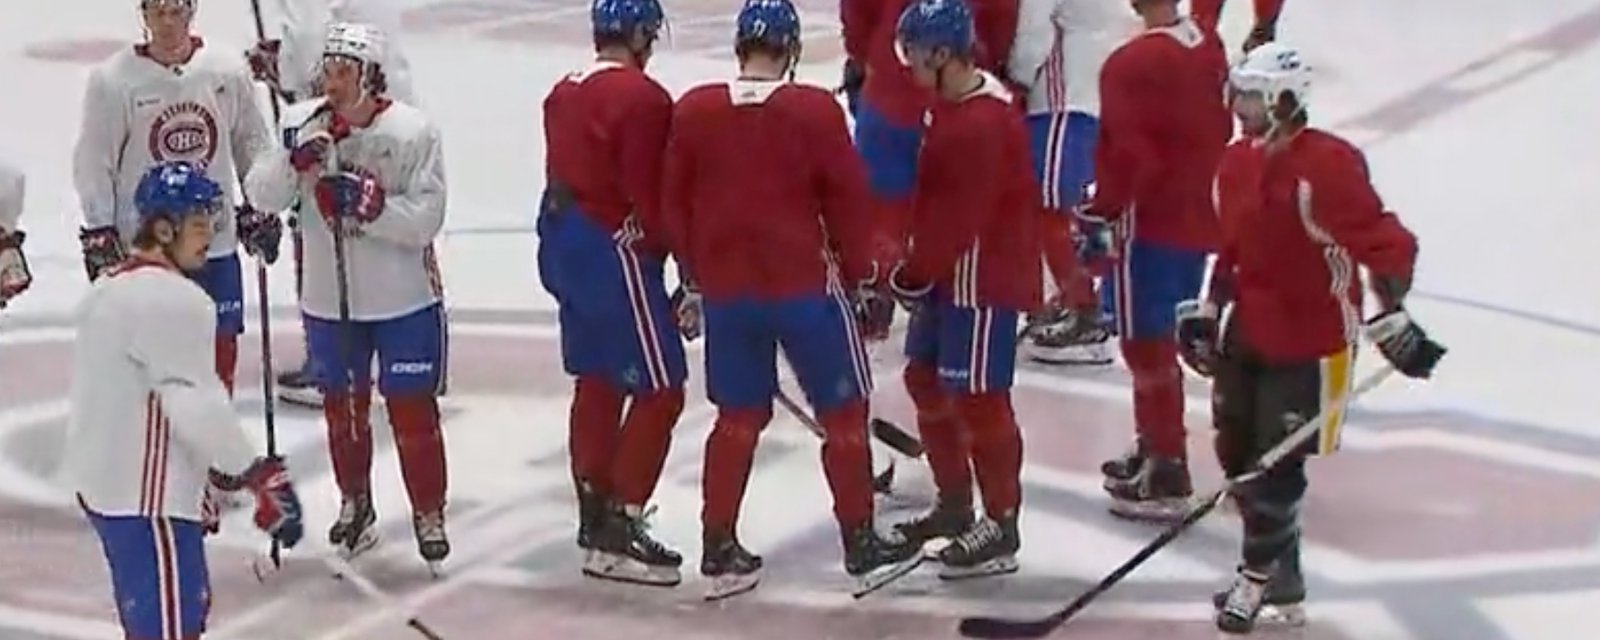 Kris Letang caught skating with Canadiens and red jersey: social media goes nuts!